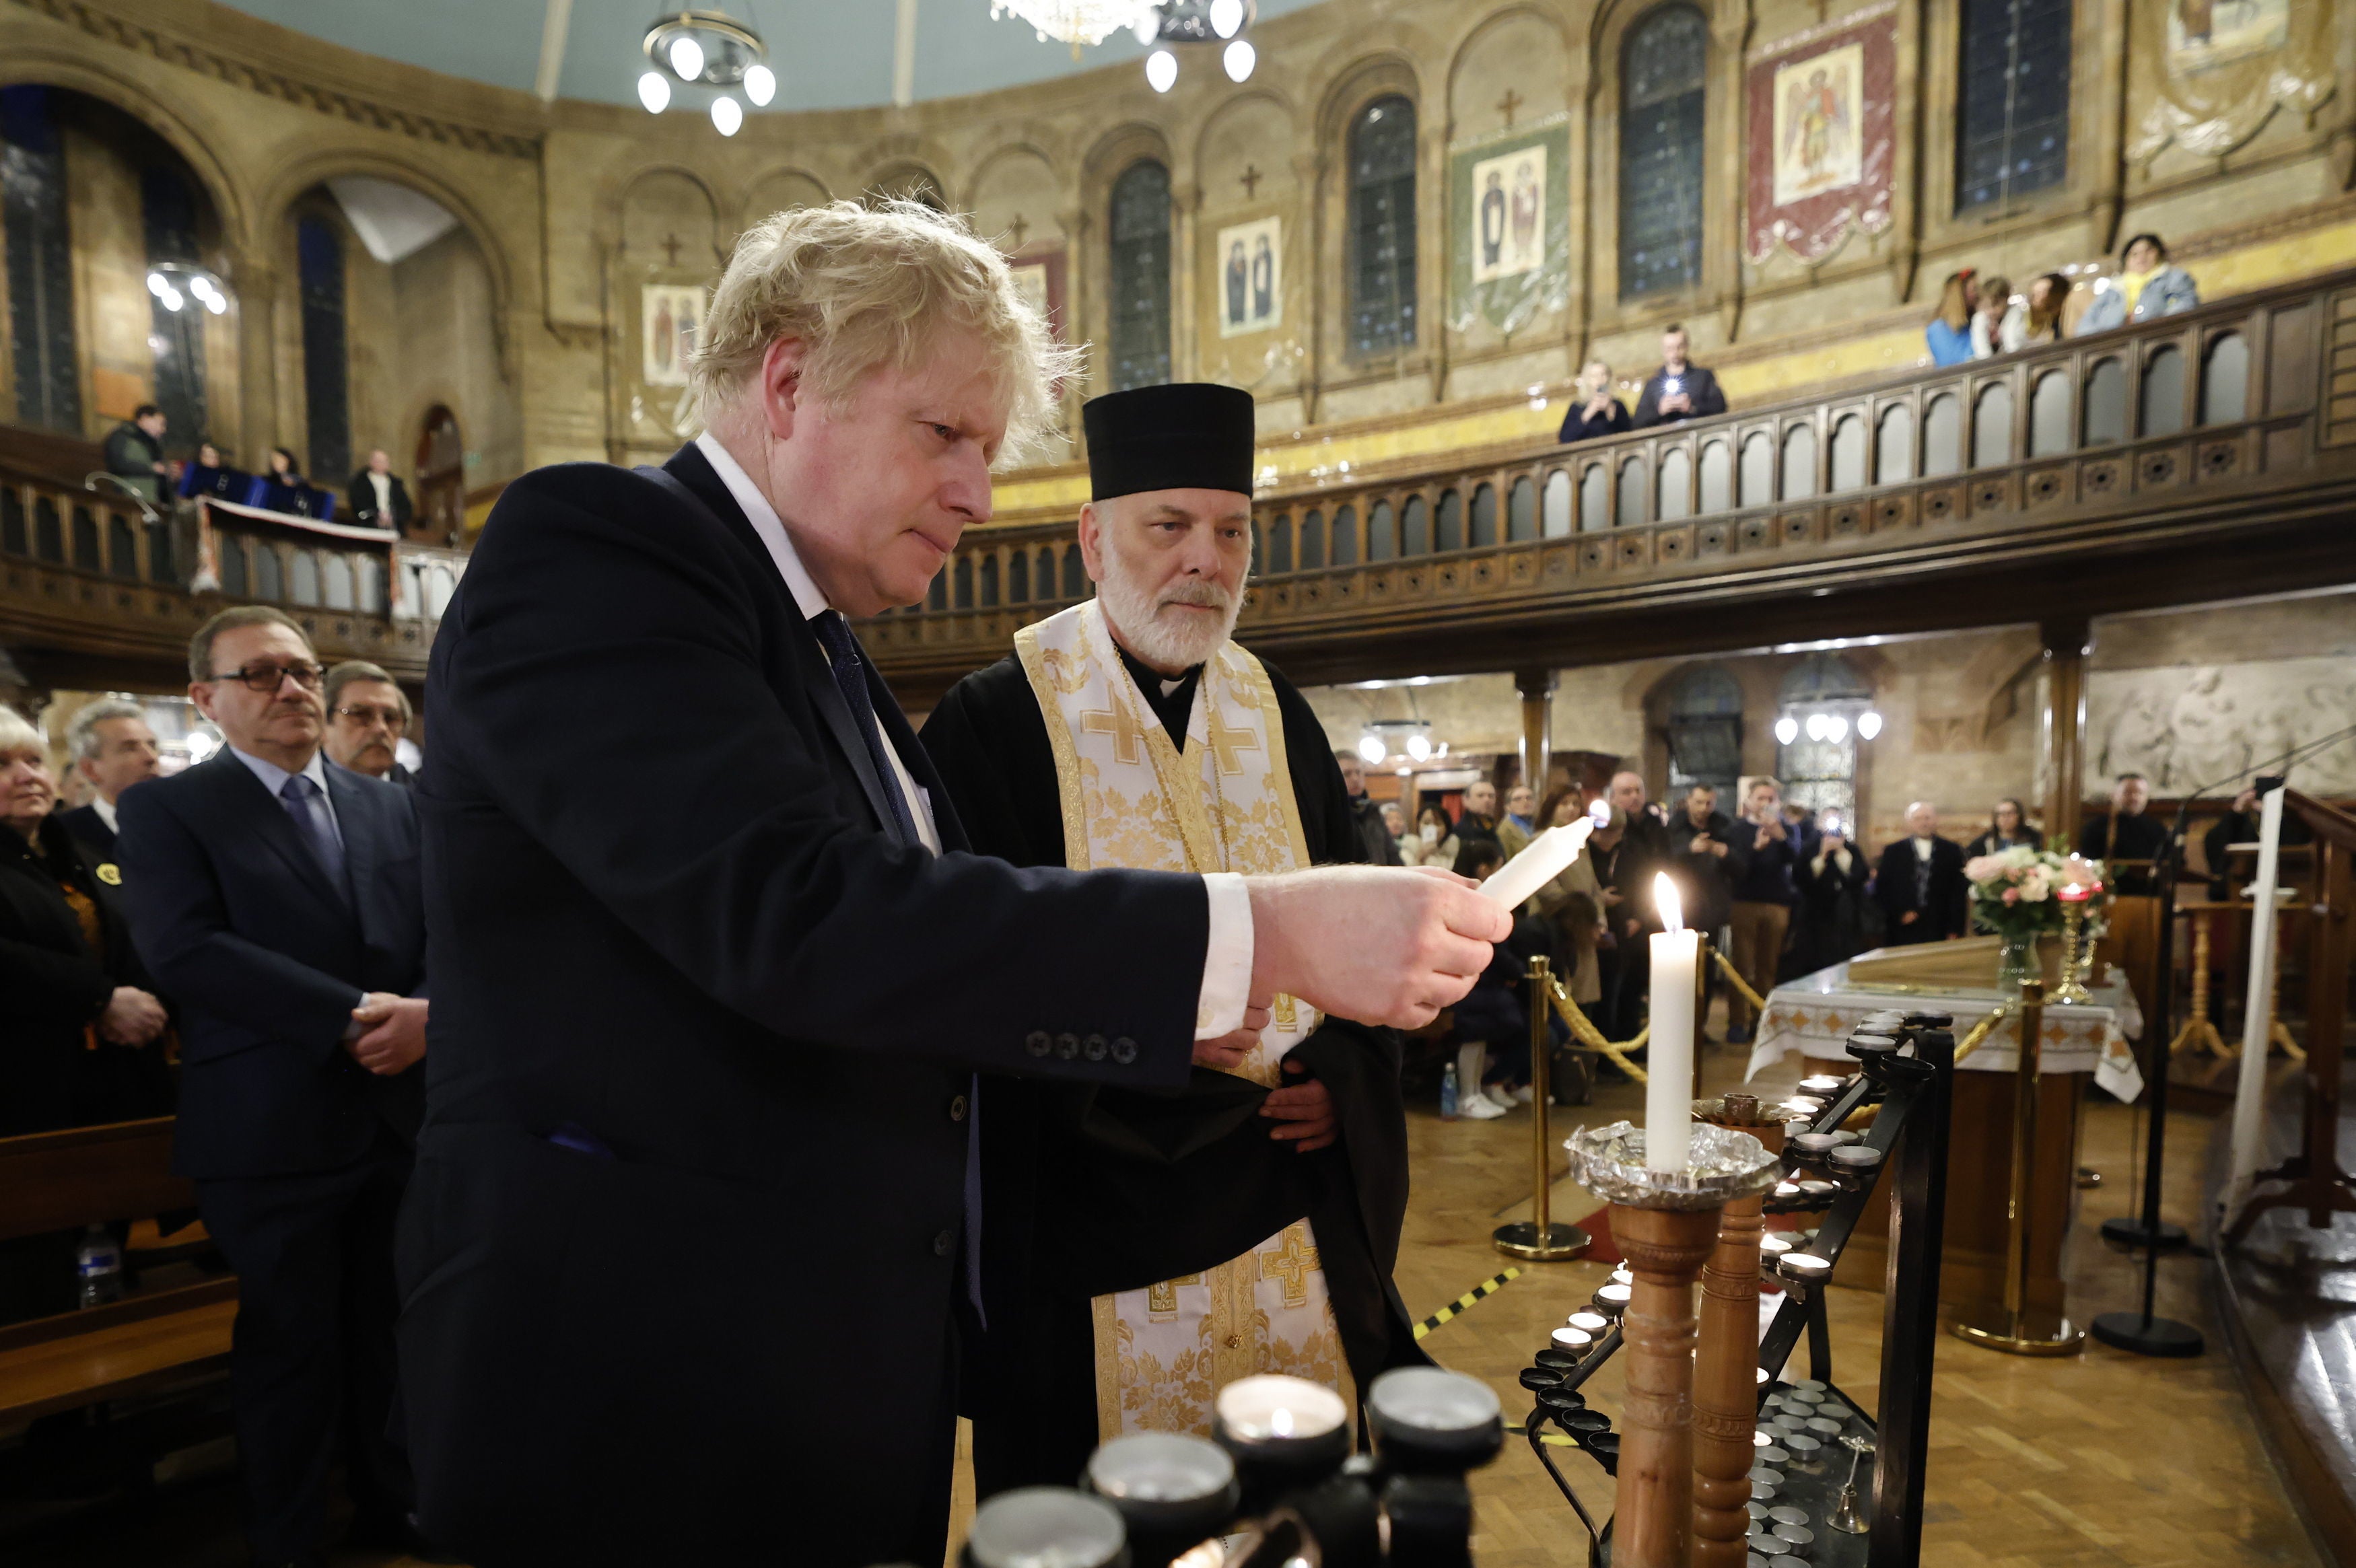 Boris Johnson lights a candle during a visit to the Ukrainian Catholic Eparchy of Holy Family of London